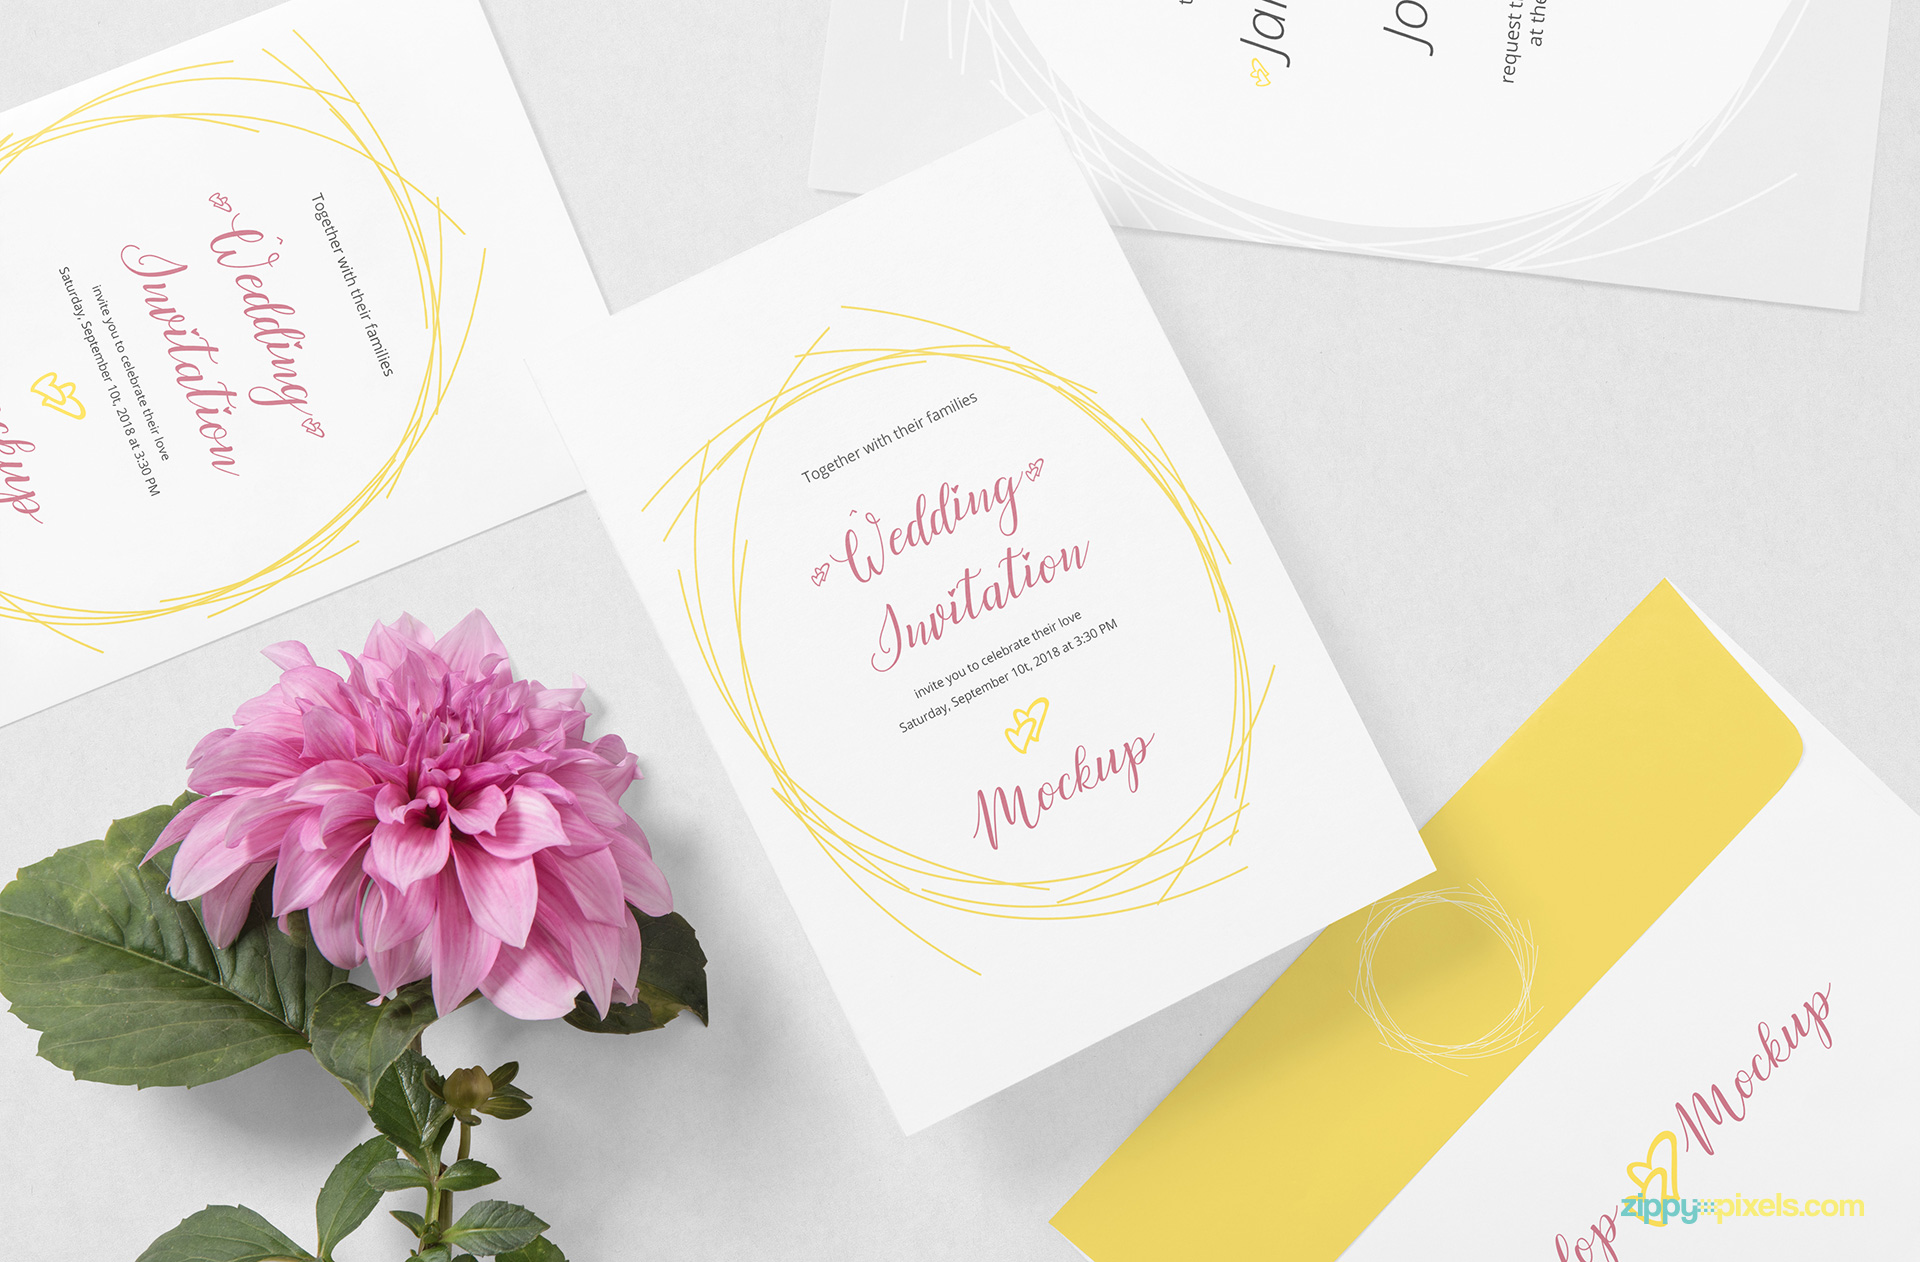 Download 45+ Free Wedding PSD Mockups for Creative Wedding Design and Premium Version! | Free PSD Templates